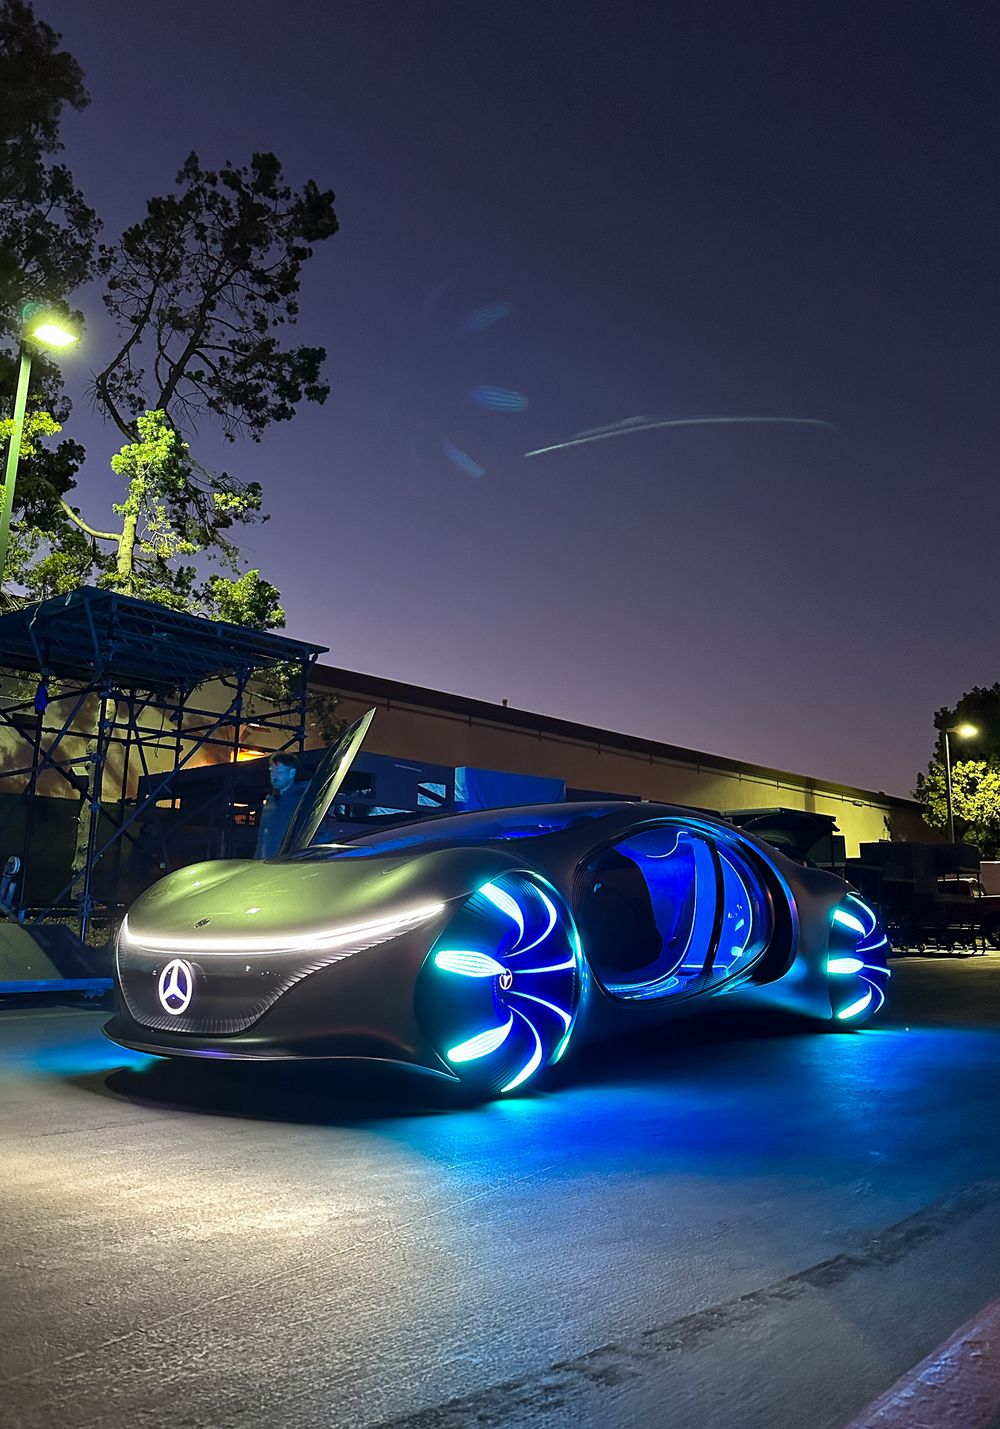 The Mercedes Benz Vision AVTR Is A Futuristic Fever Dream That's Hilariously Nerve Racking To Drive